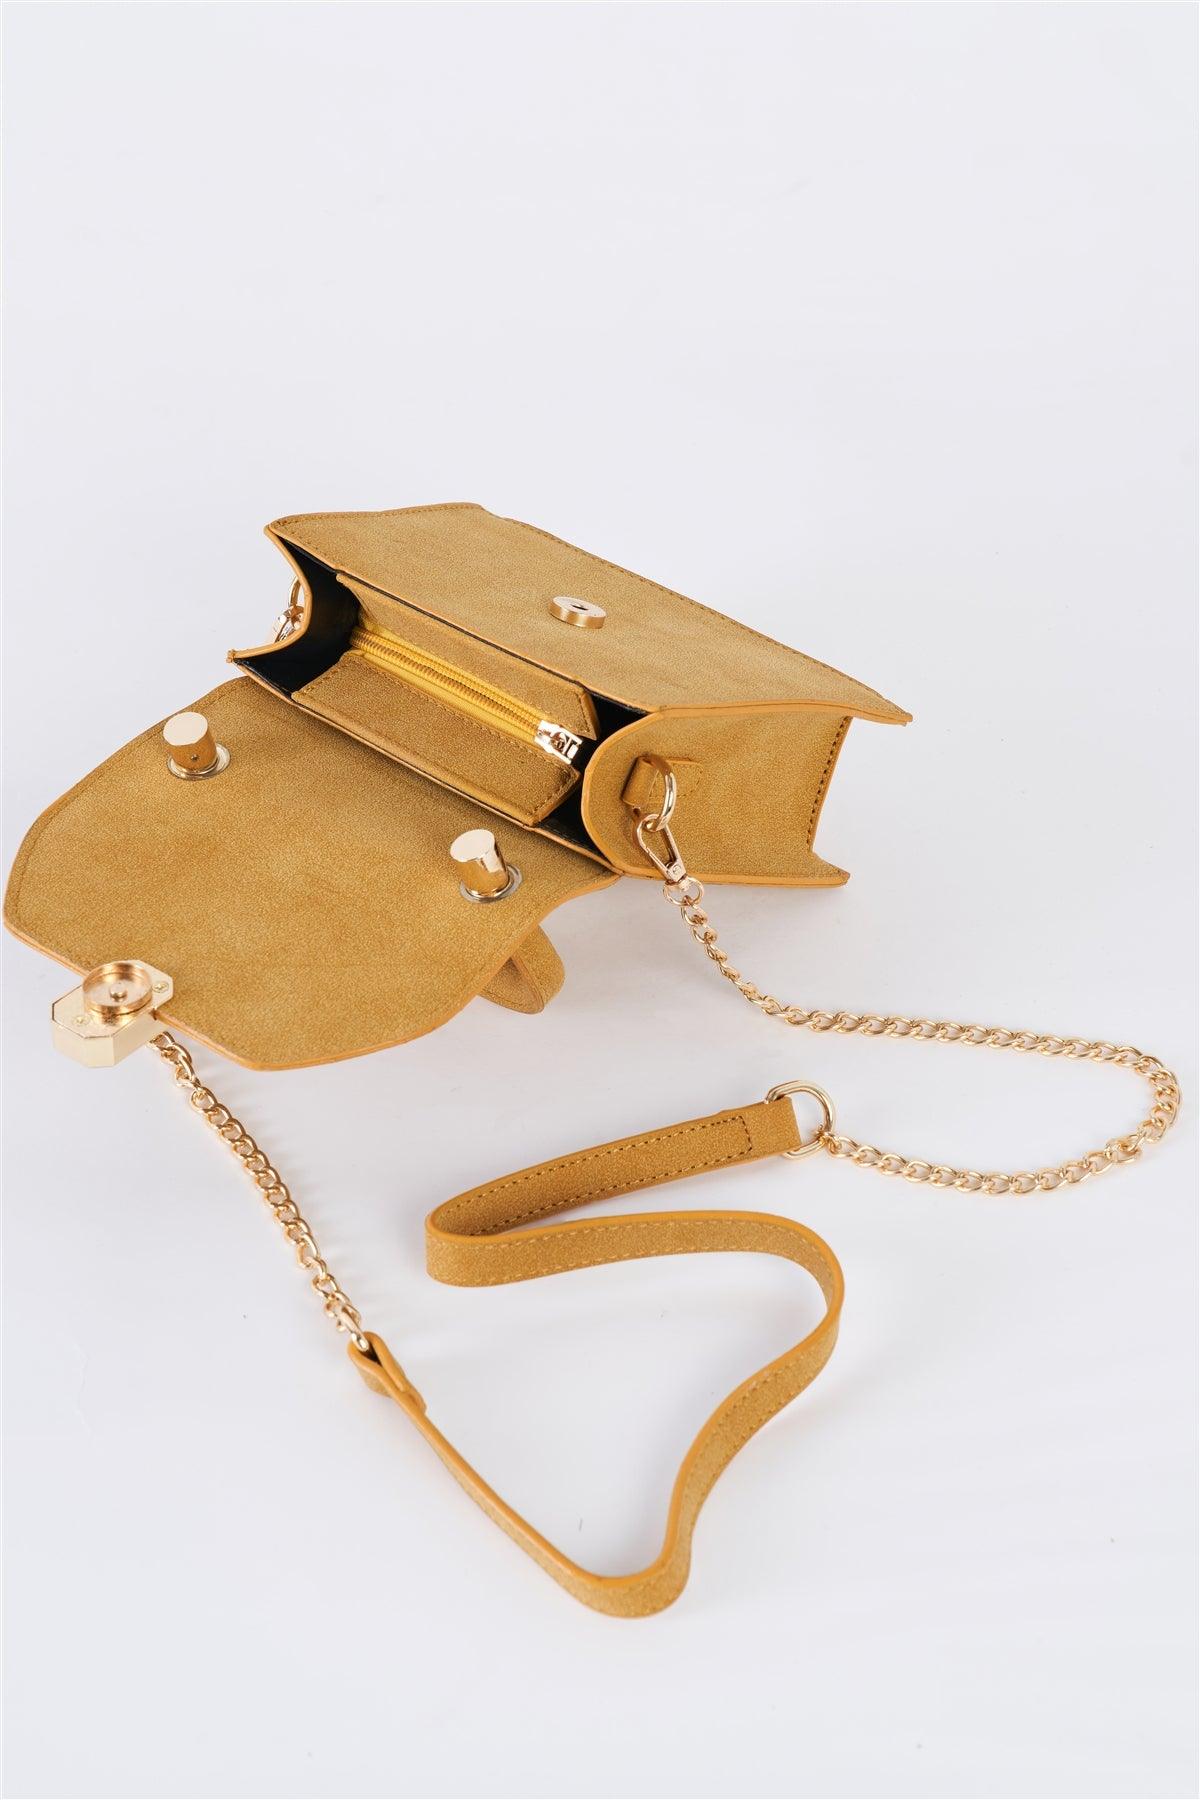 Mustard Yellow Vintage Inspired Purse With Gem Closure Detail /3 Bags